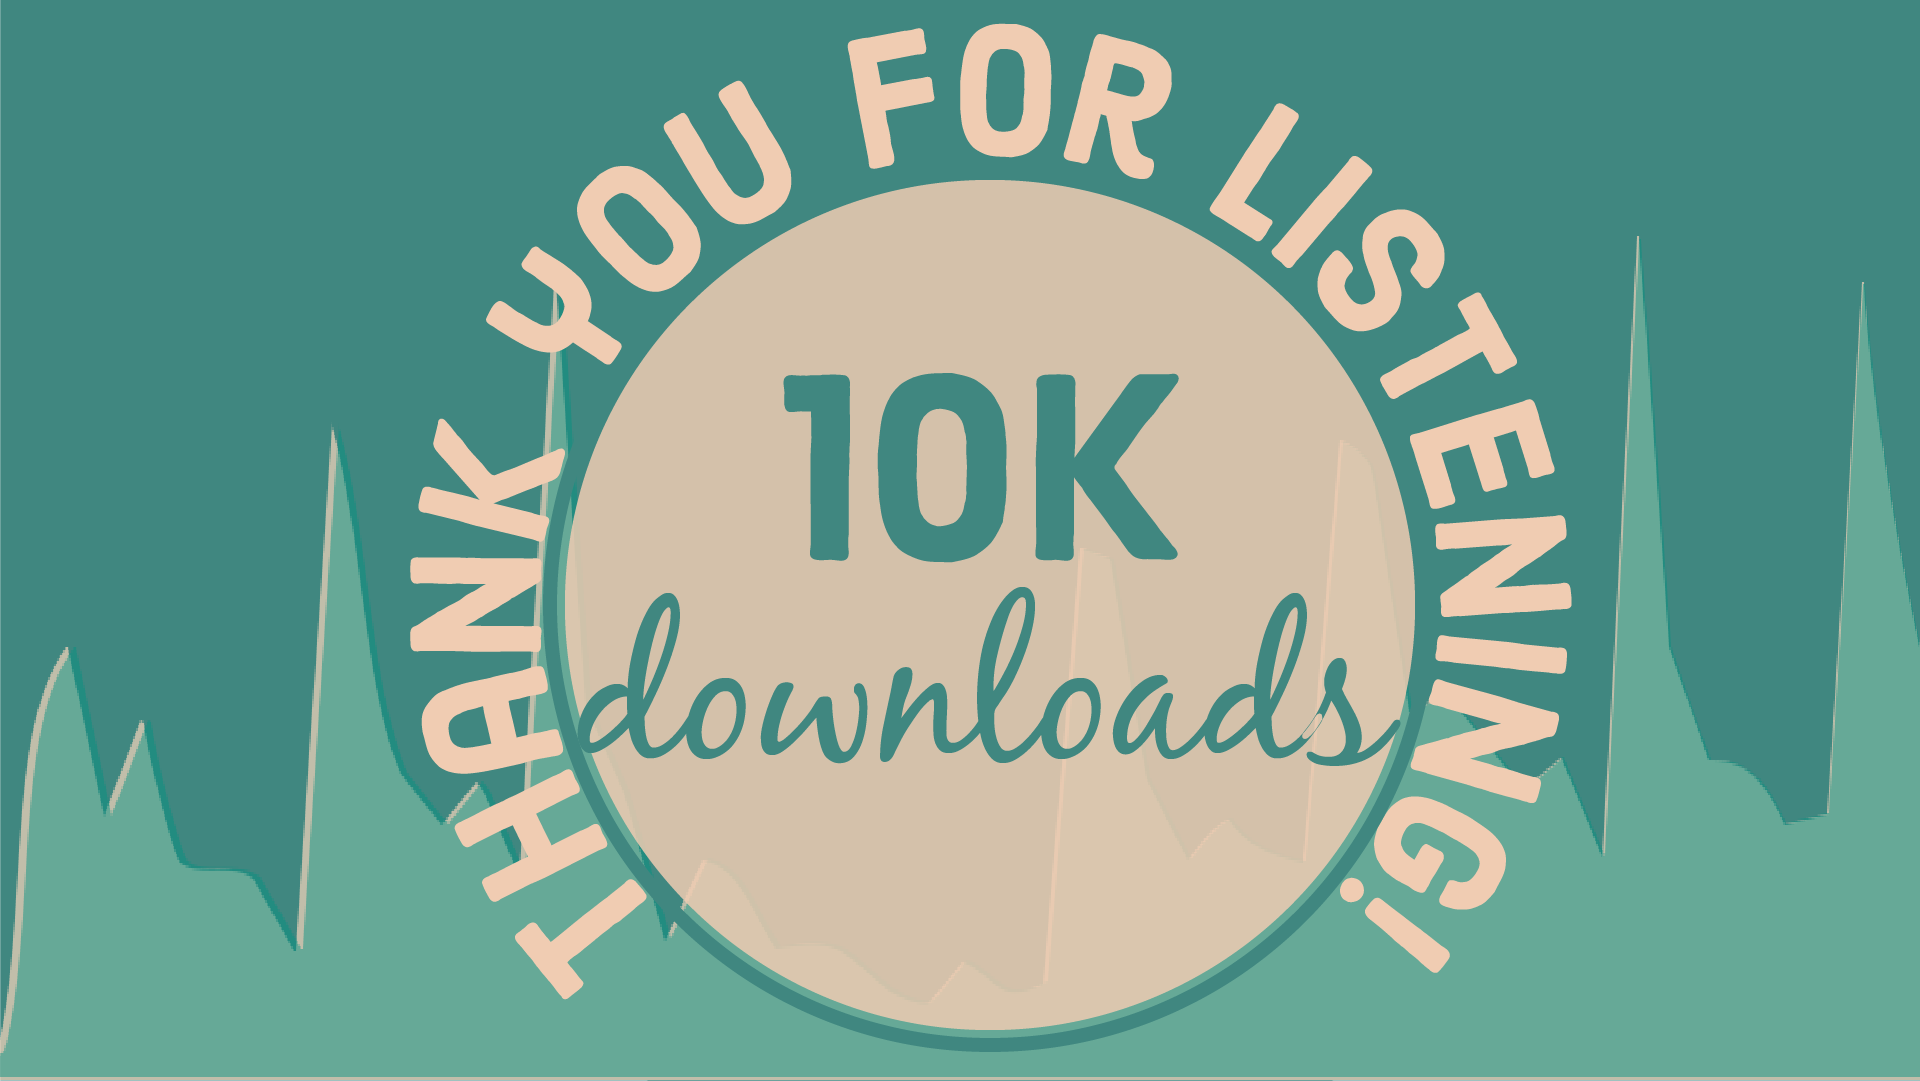 Thee Quaker Podcast Has 10k Downloads!